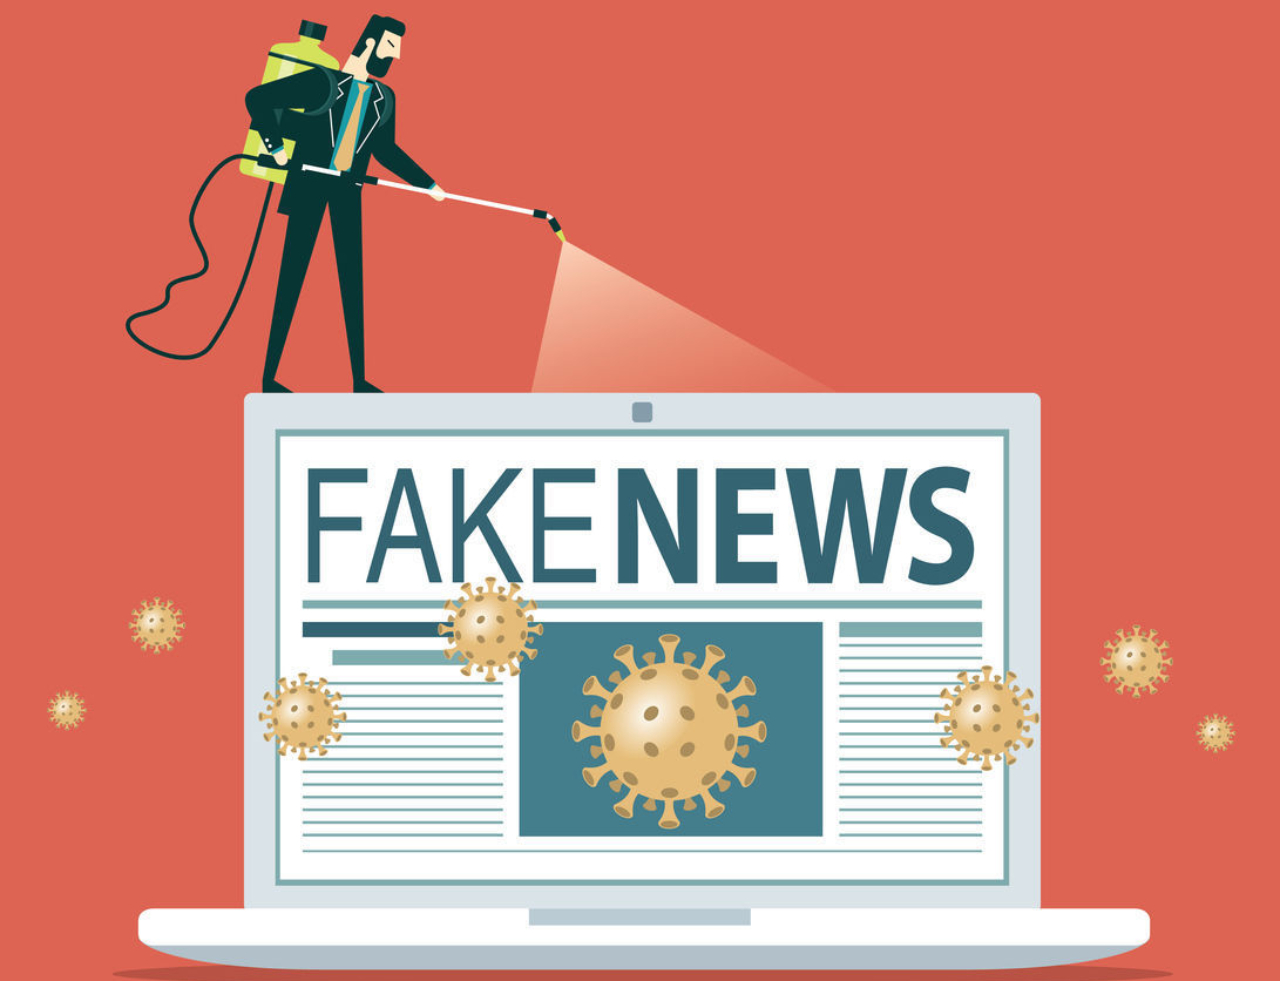 How Can We Combat the Spread of Fake News?